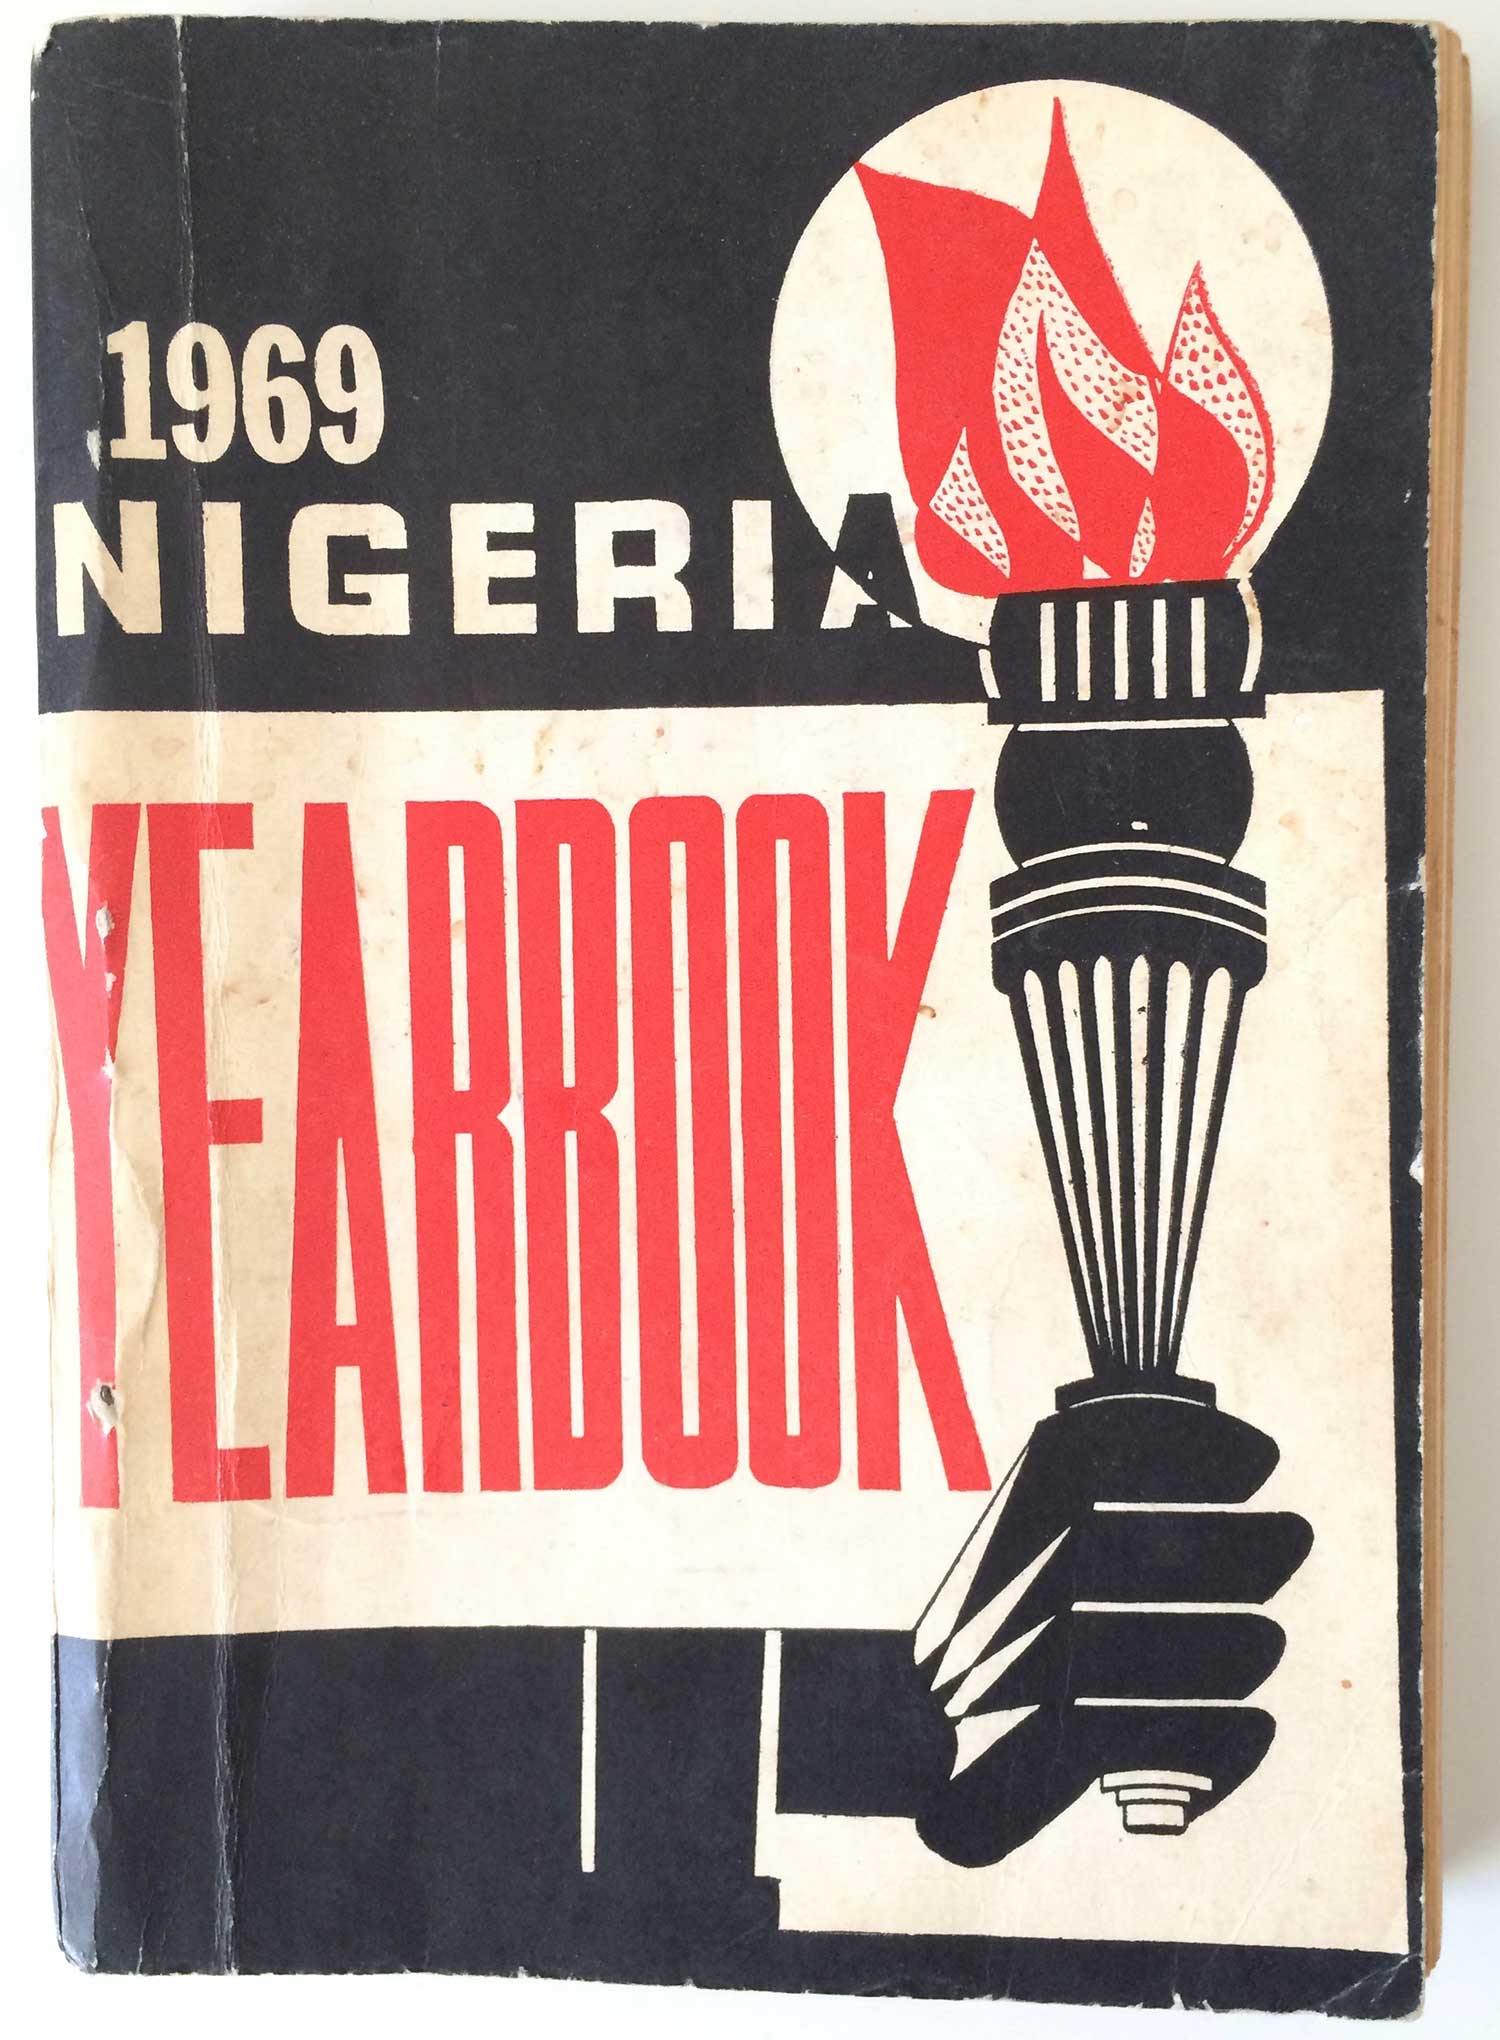 NigeriaYearbook69_cover